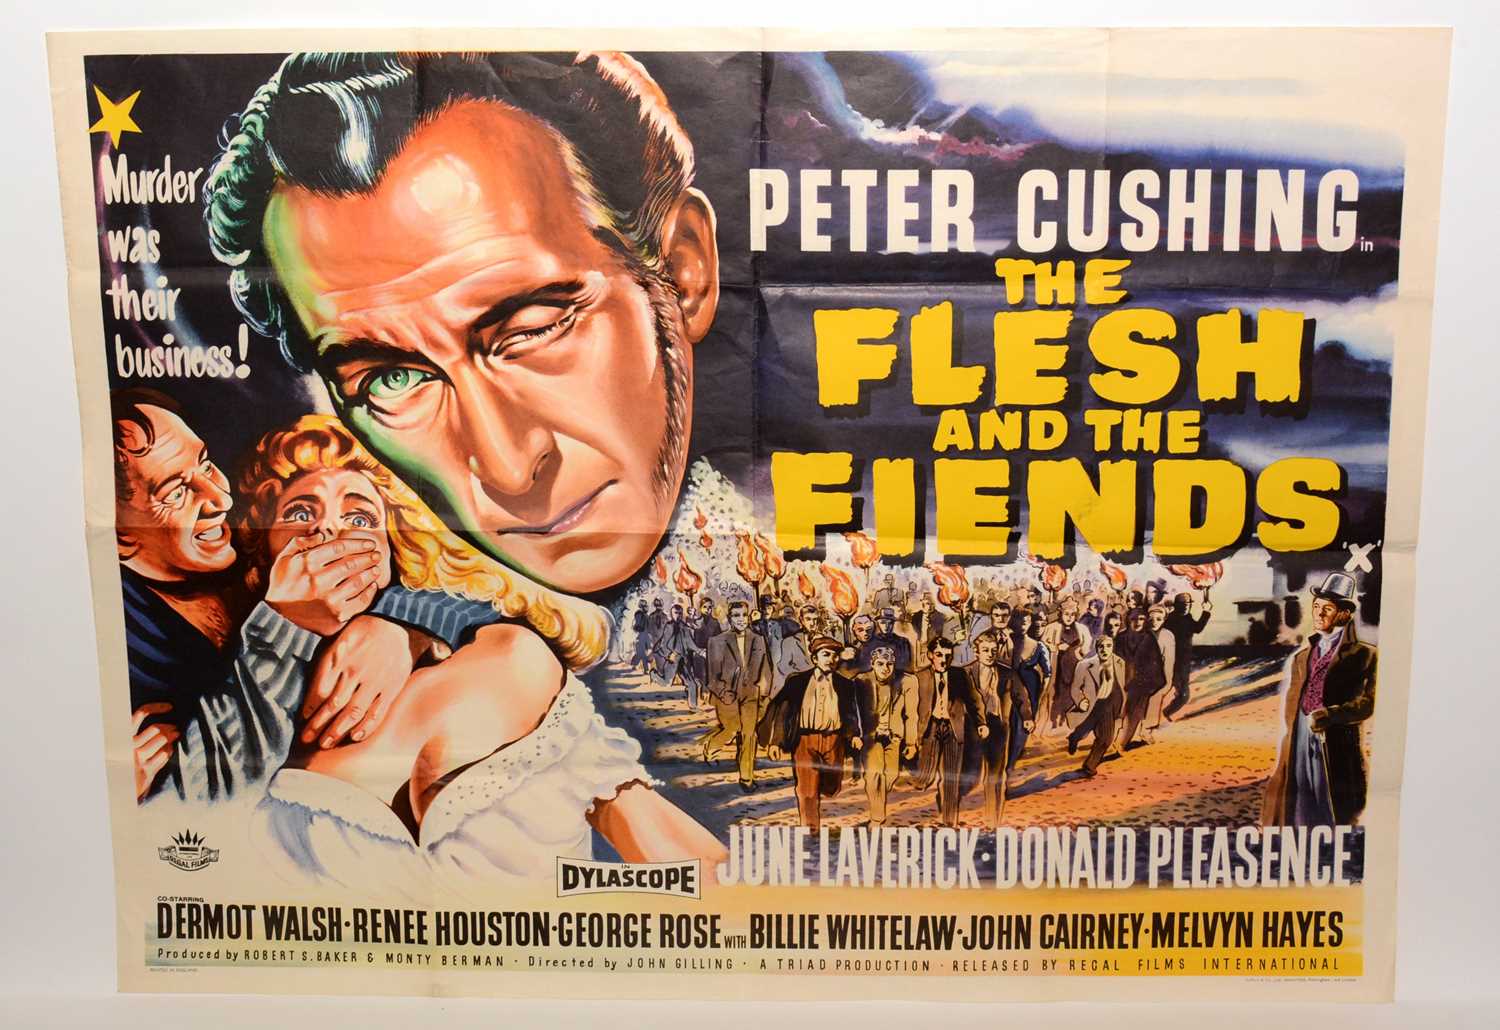 Lot 1279 - British quad movie poster for "The Flesh and the Fiends"